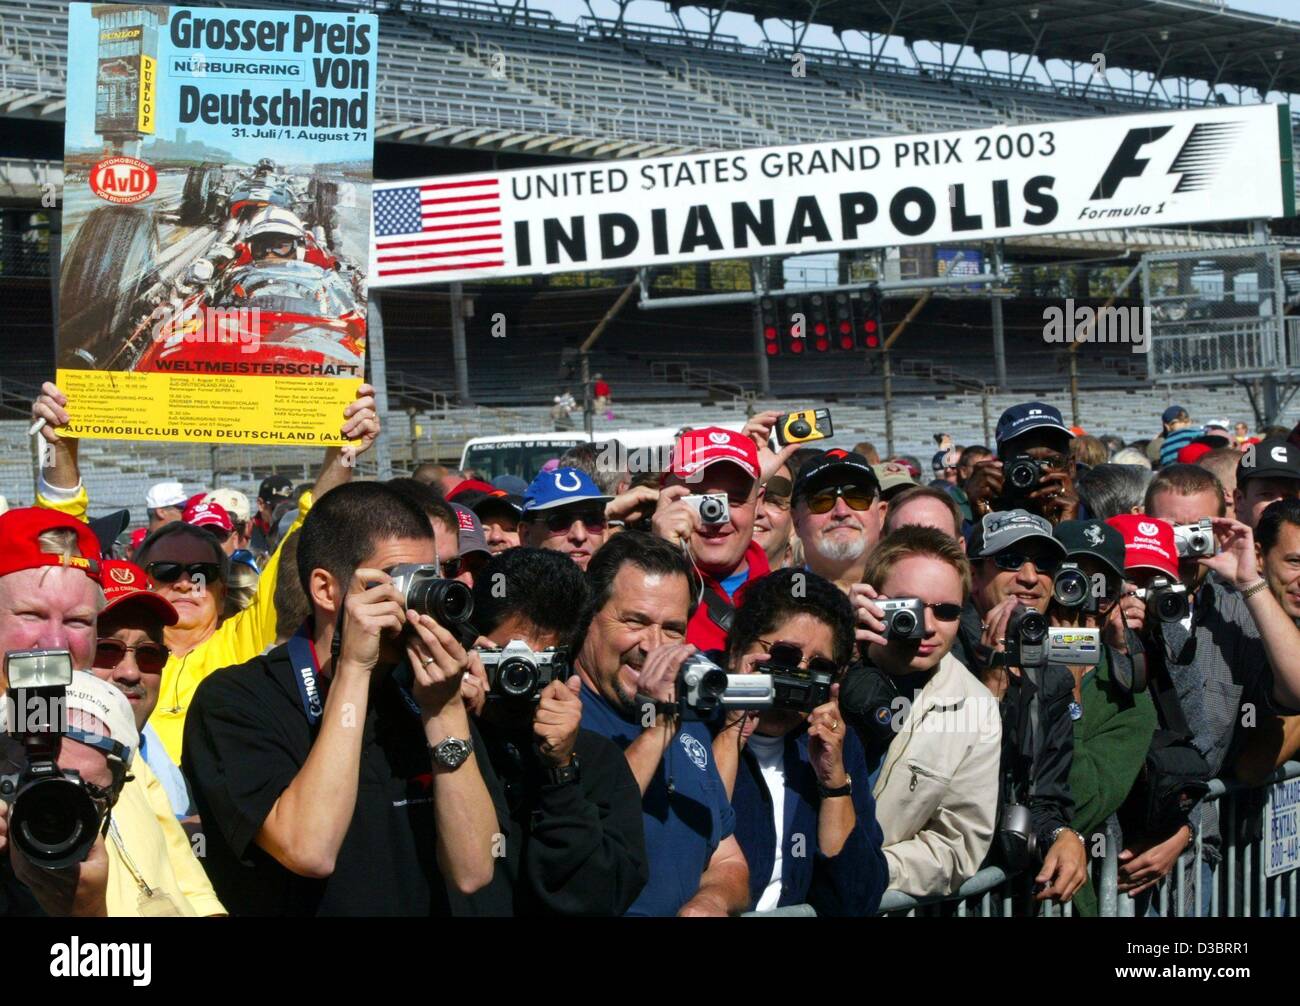 (dpa) - Hundreds of formula one fans wait at the pit line for their idols at the race track in Indianapolis, USA, 25 September 2003. With an open day for the public thousands of fans were attracted to the race tracks two days ahead of the United States Grand Prix on Sunday, 28 September. Stock Photo